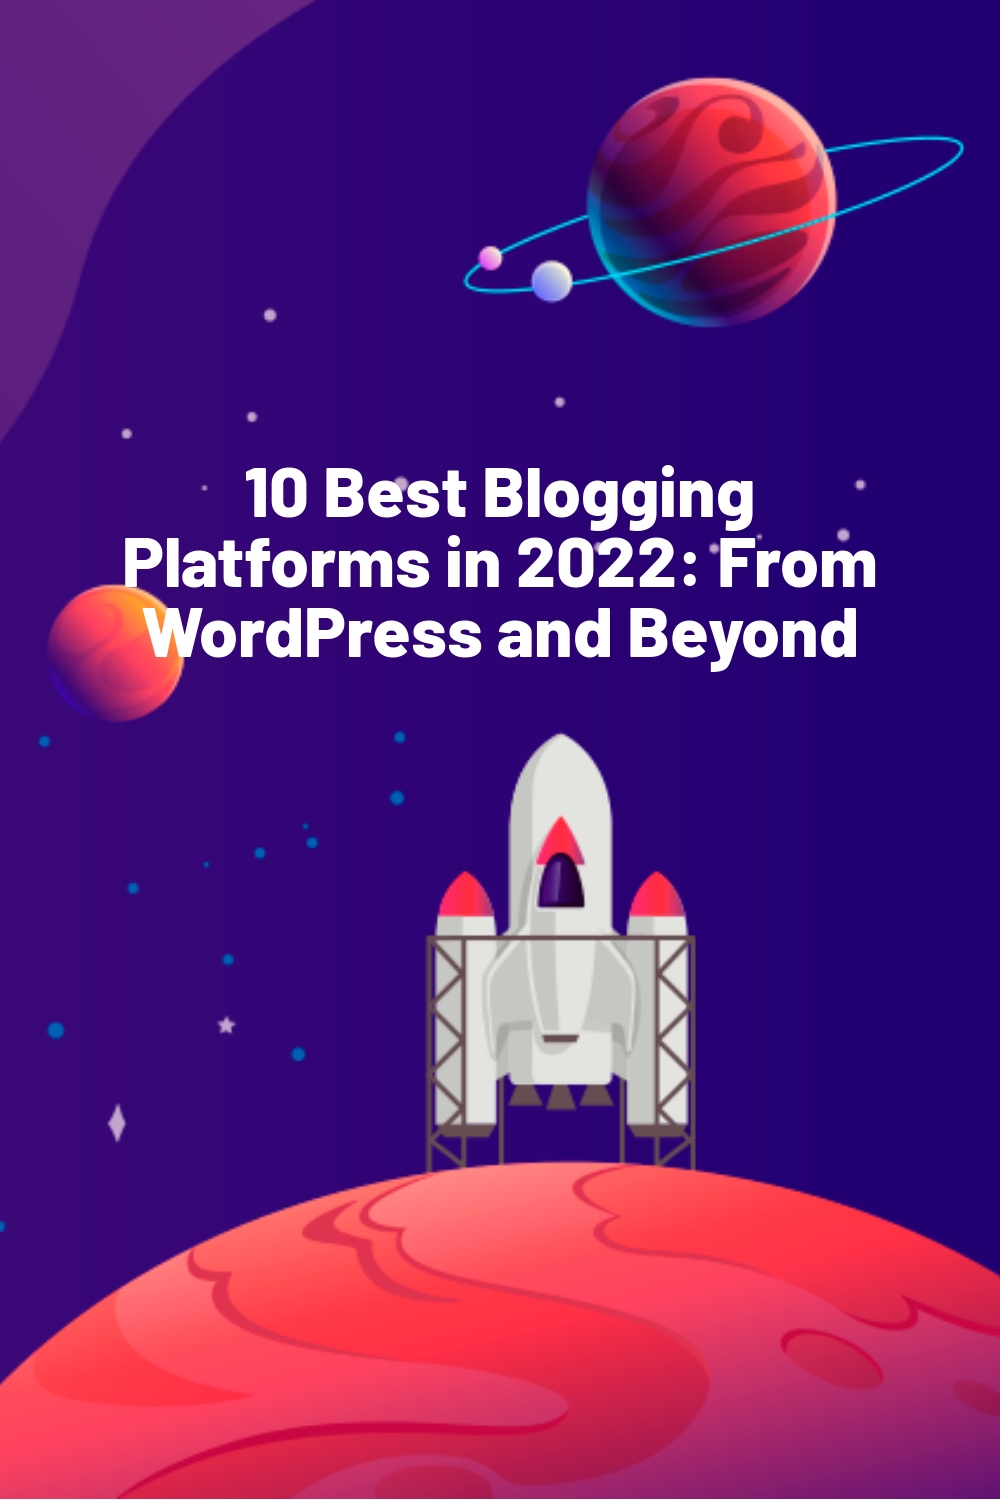 10 Best Blogging Platforms in 2022: From WordPress and Beyond